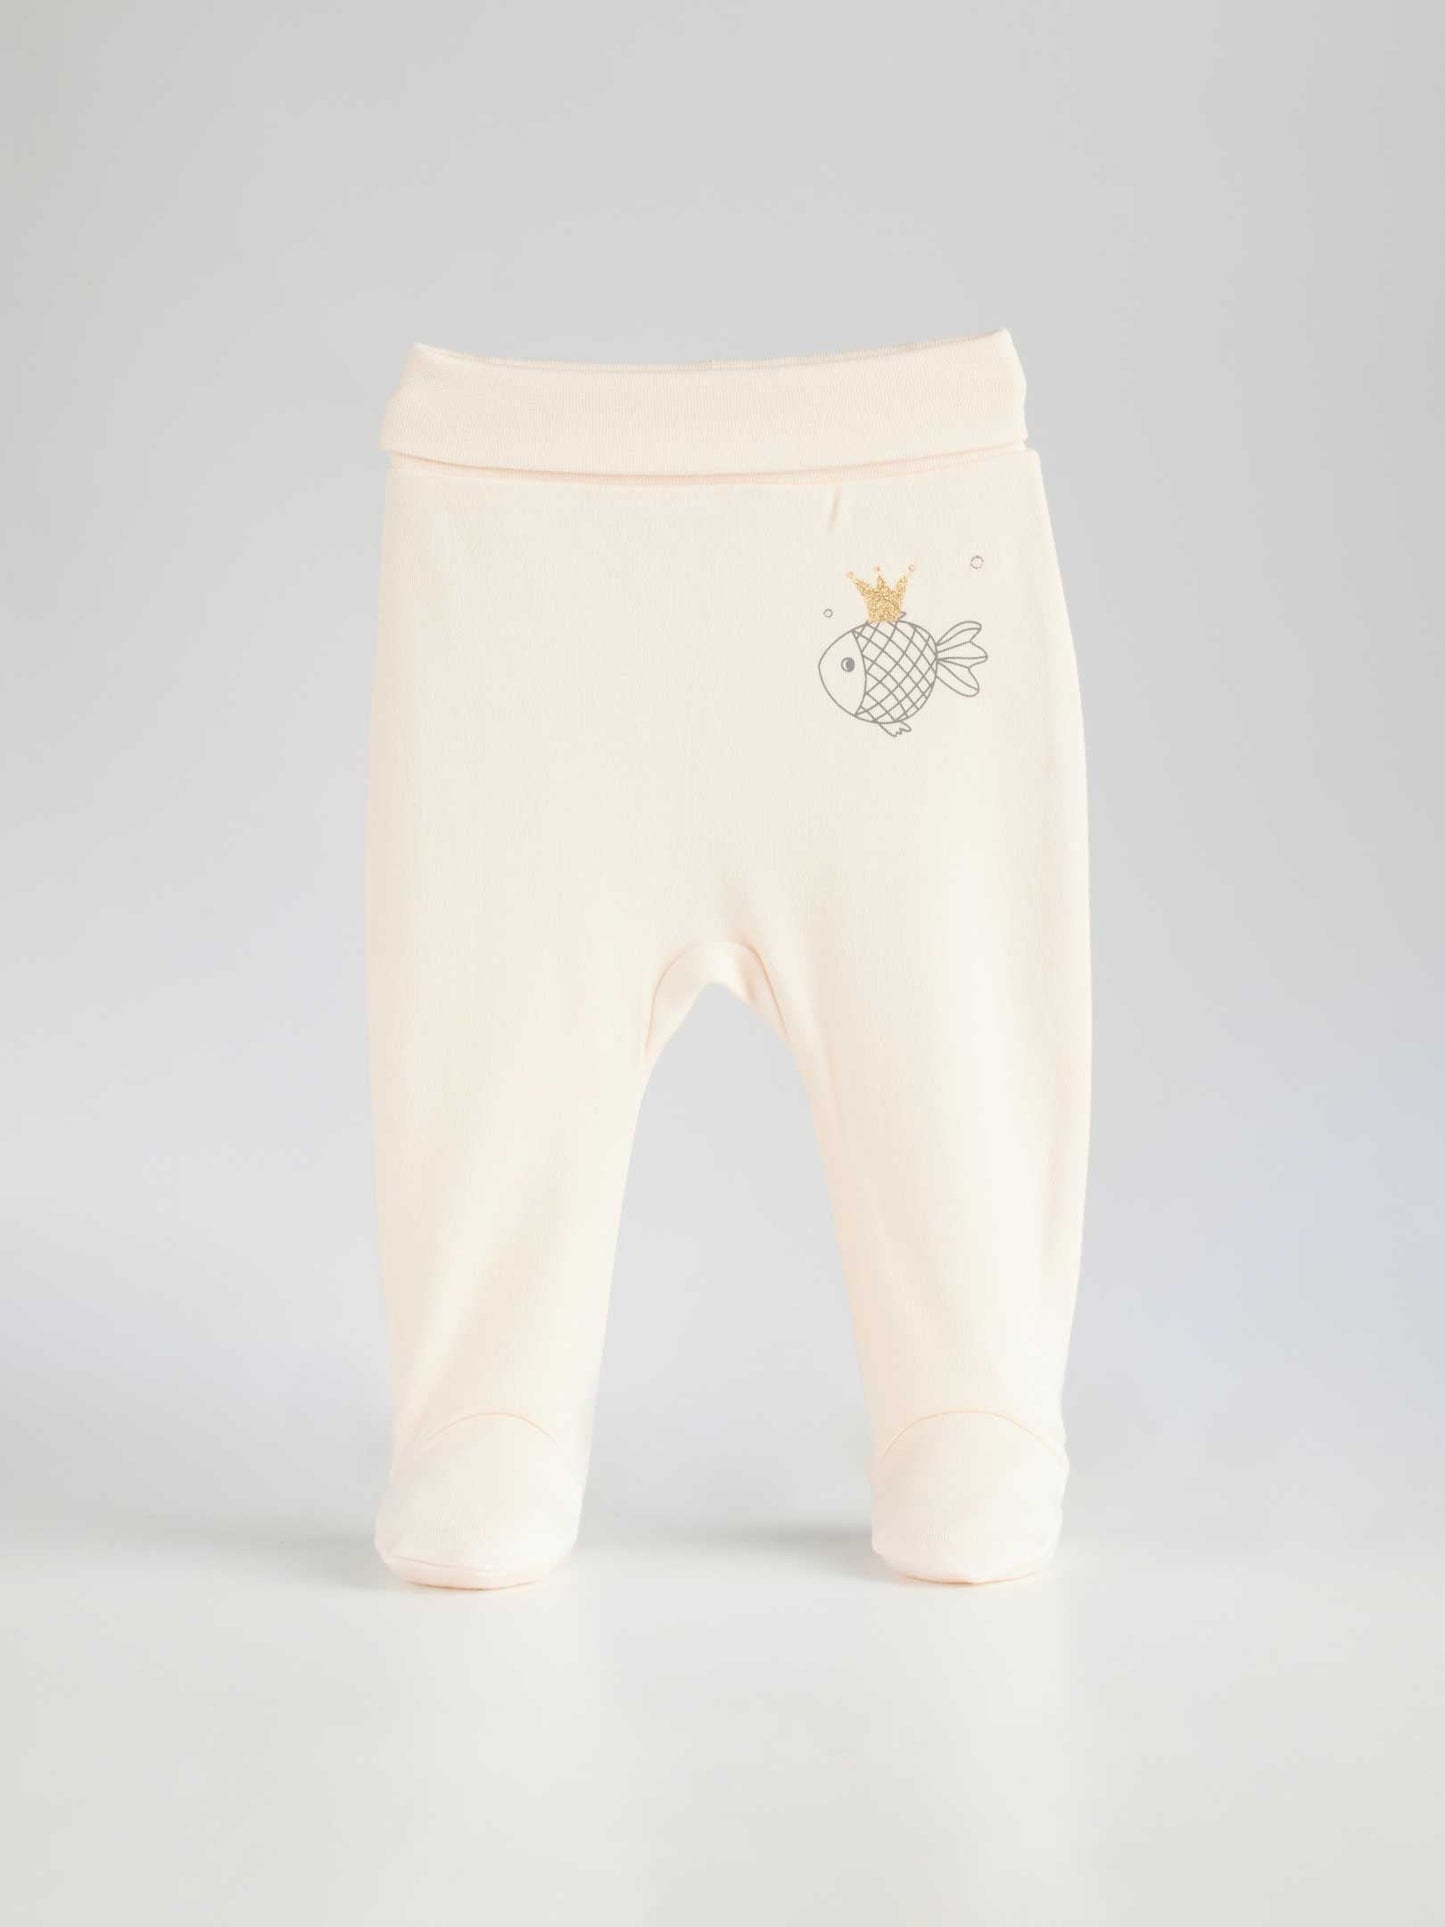 Infant pants model Godl Fish 305 made from high quality 100% cotton have a nice warm color and a cute fish with a golden crown on the left sitde of the pants 